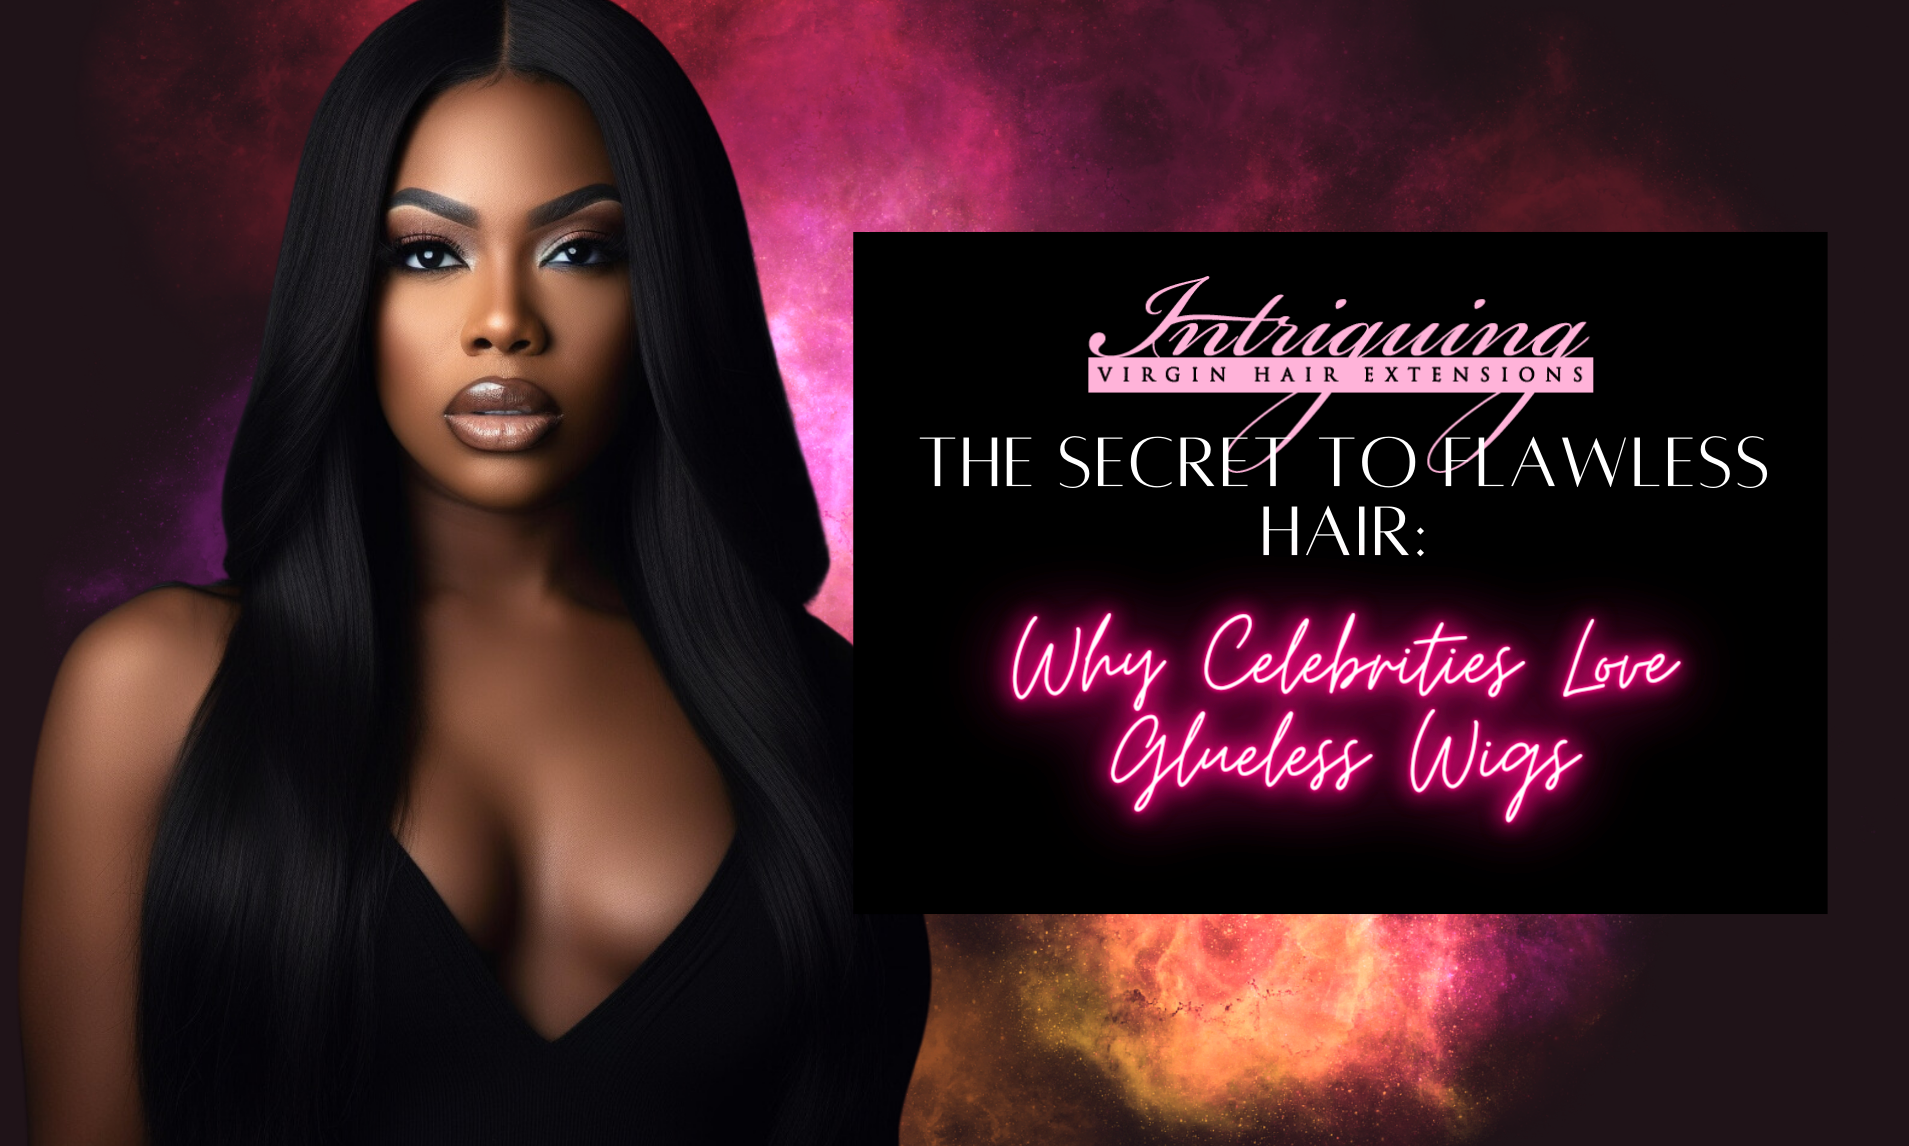 The Secret to Flawless Hair: Why Celebrities Love Glueless Wigs